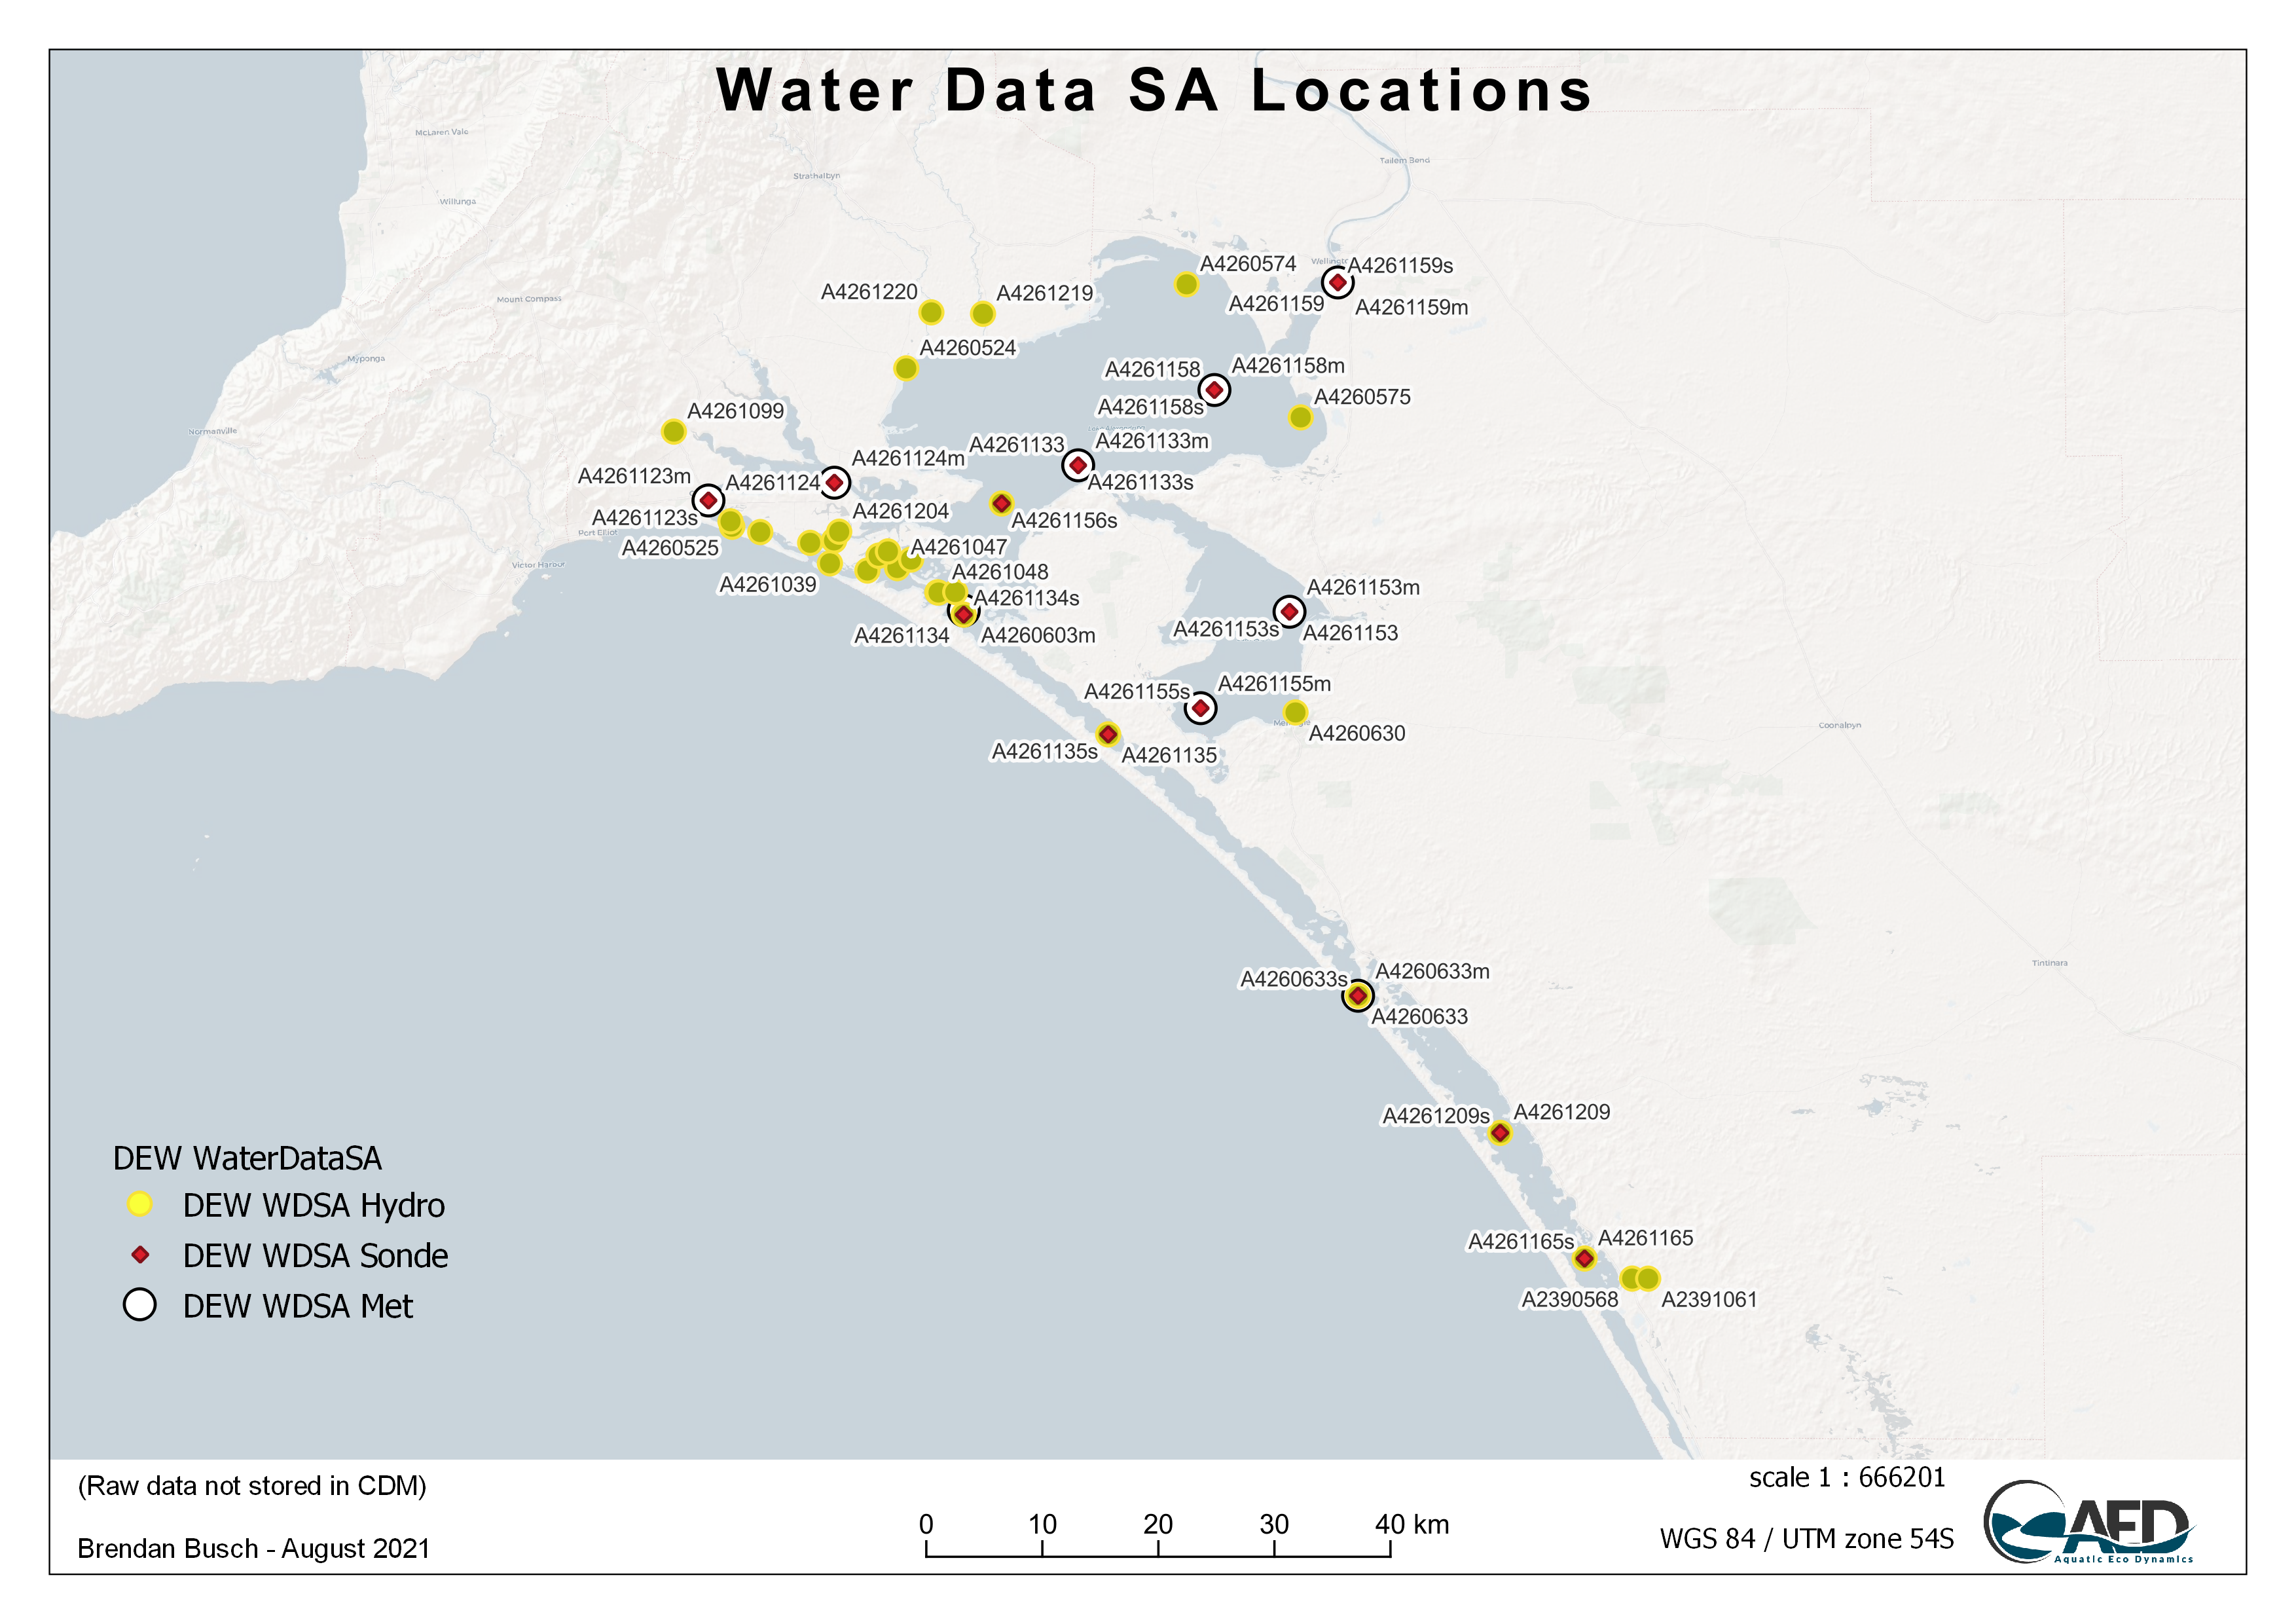 Example GIS Map showing the sampling locations for the Water Data SA online data 